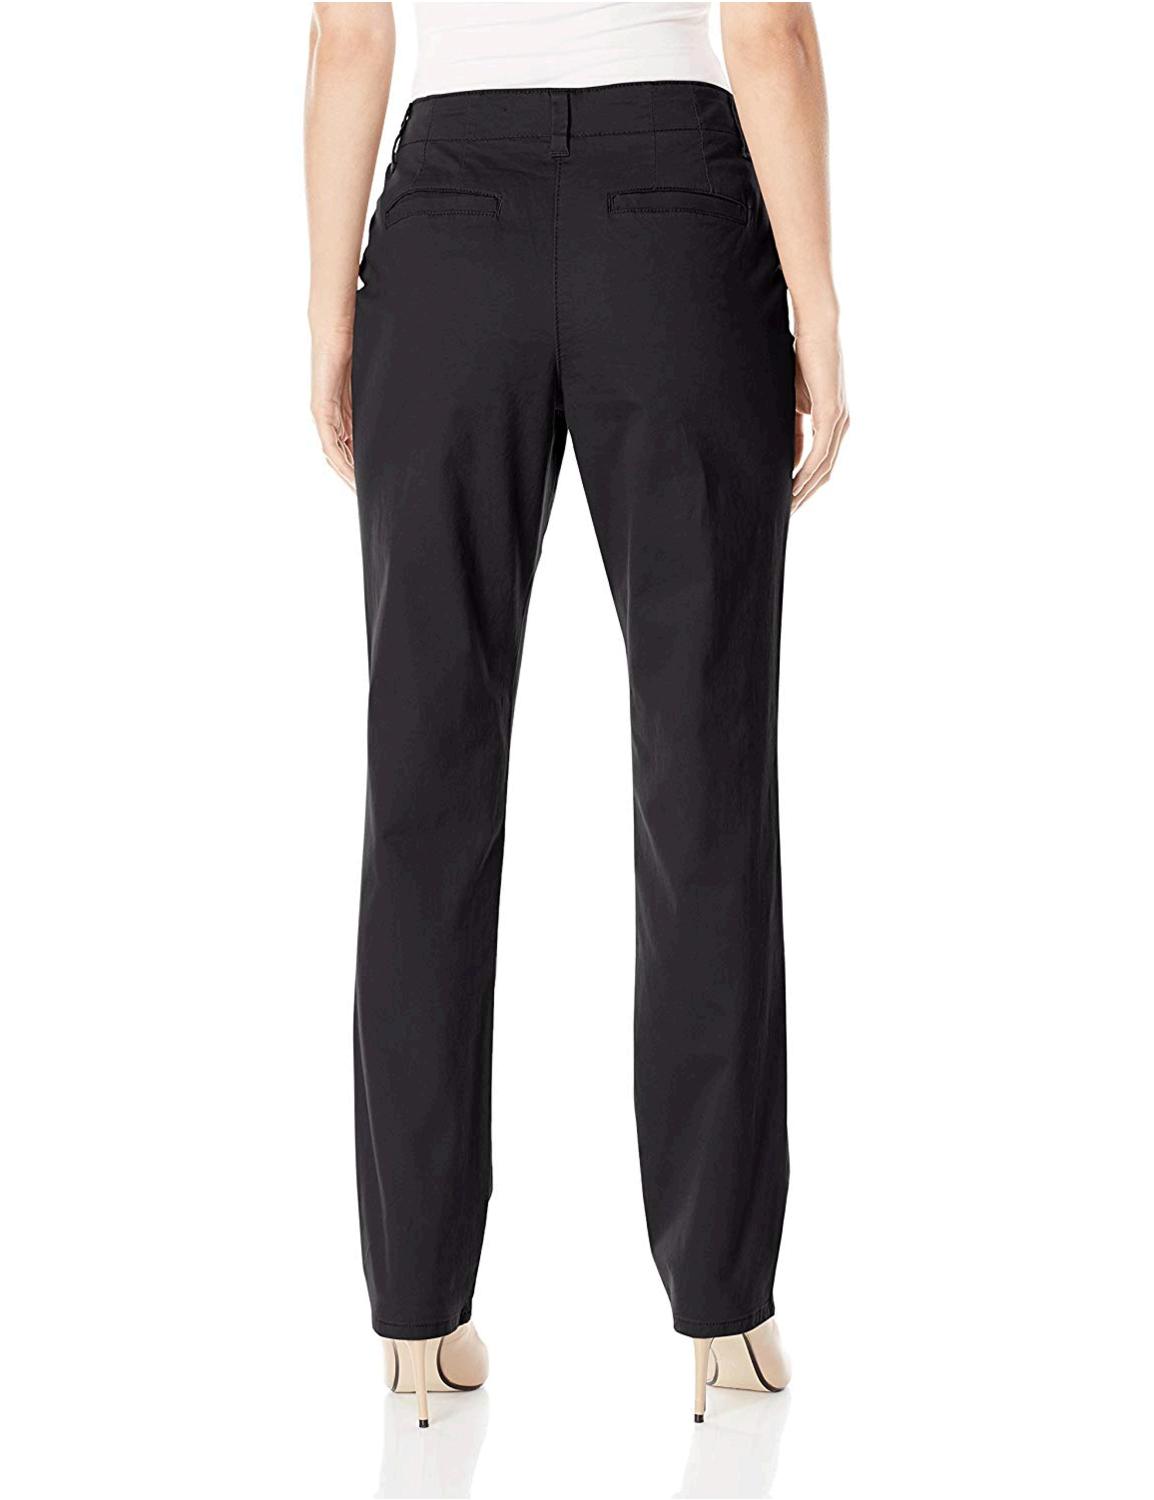 Lee Women's Midrise Fit Essential Chino Pant, Black, 4, Black, Size 4.0 ...